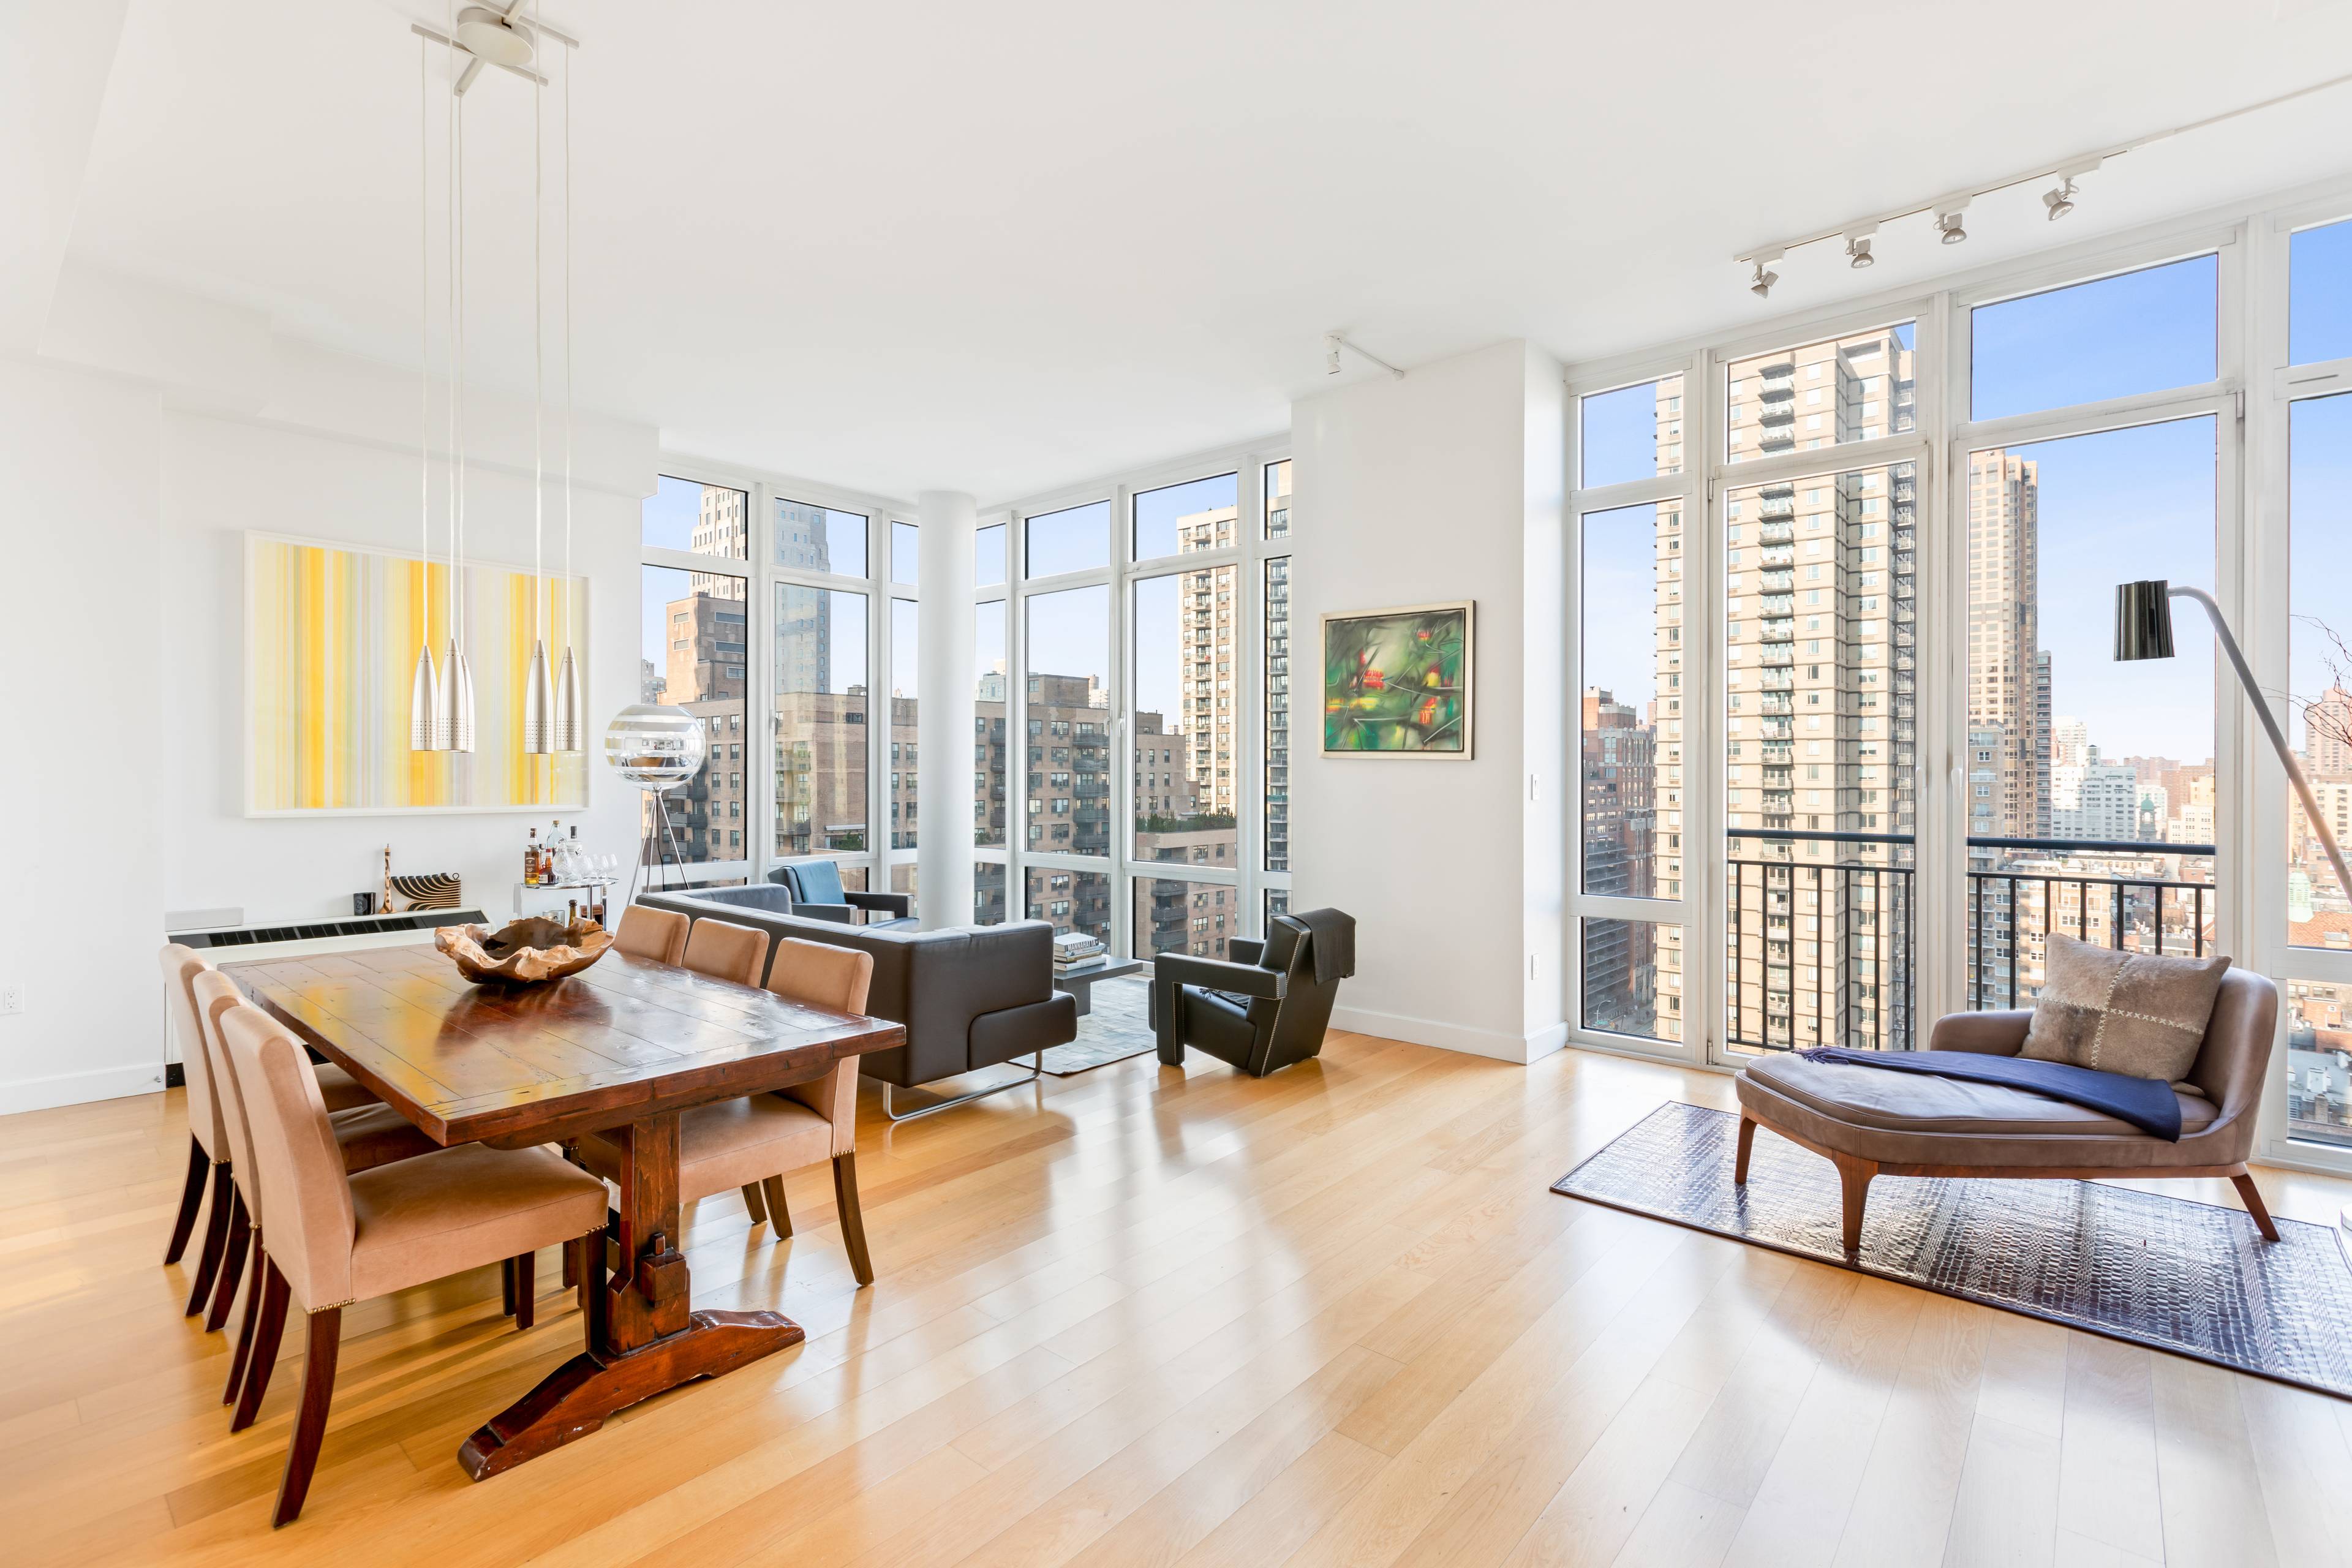 A truly rare find, this high floor, three bedroom home with semi private elevator landing is in one of the Upper East Side's most sought after, full service condominiums.